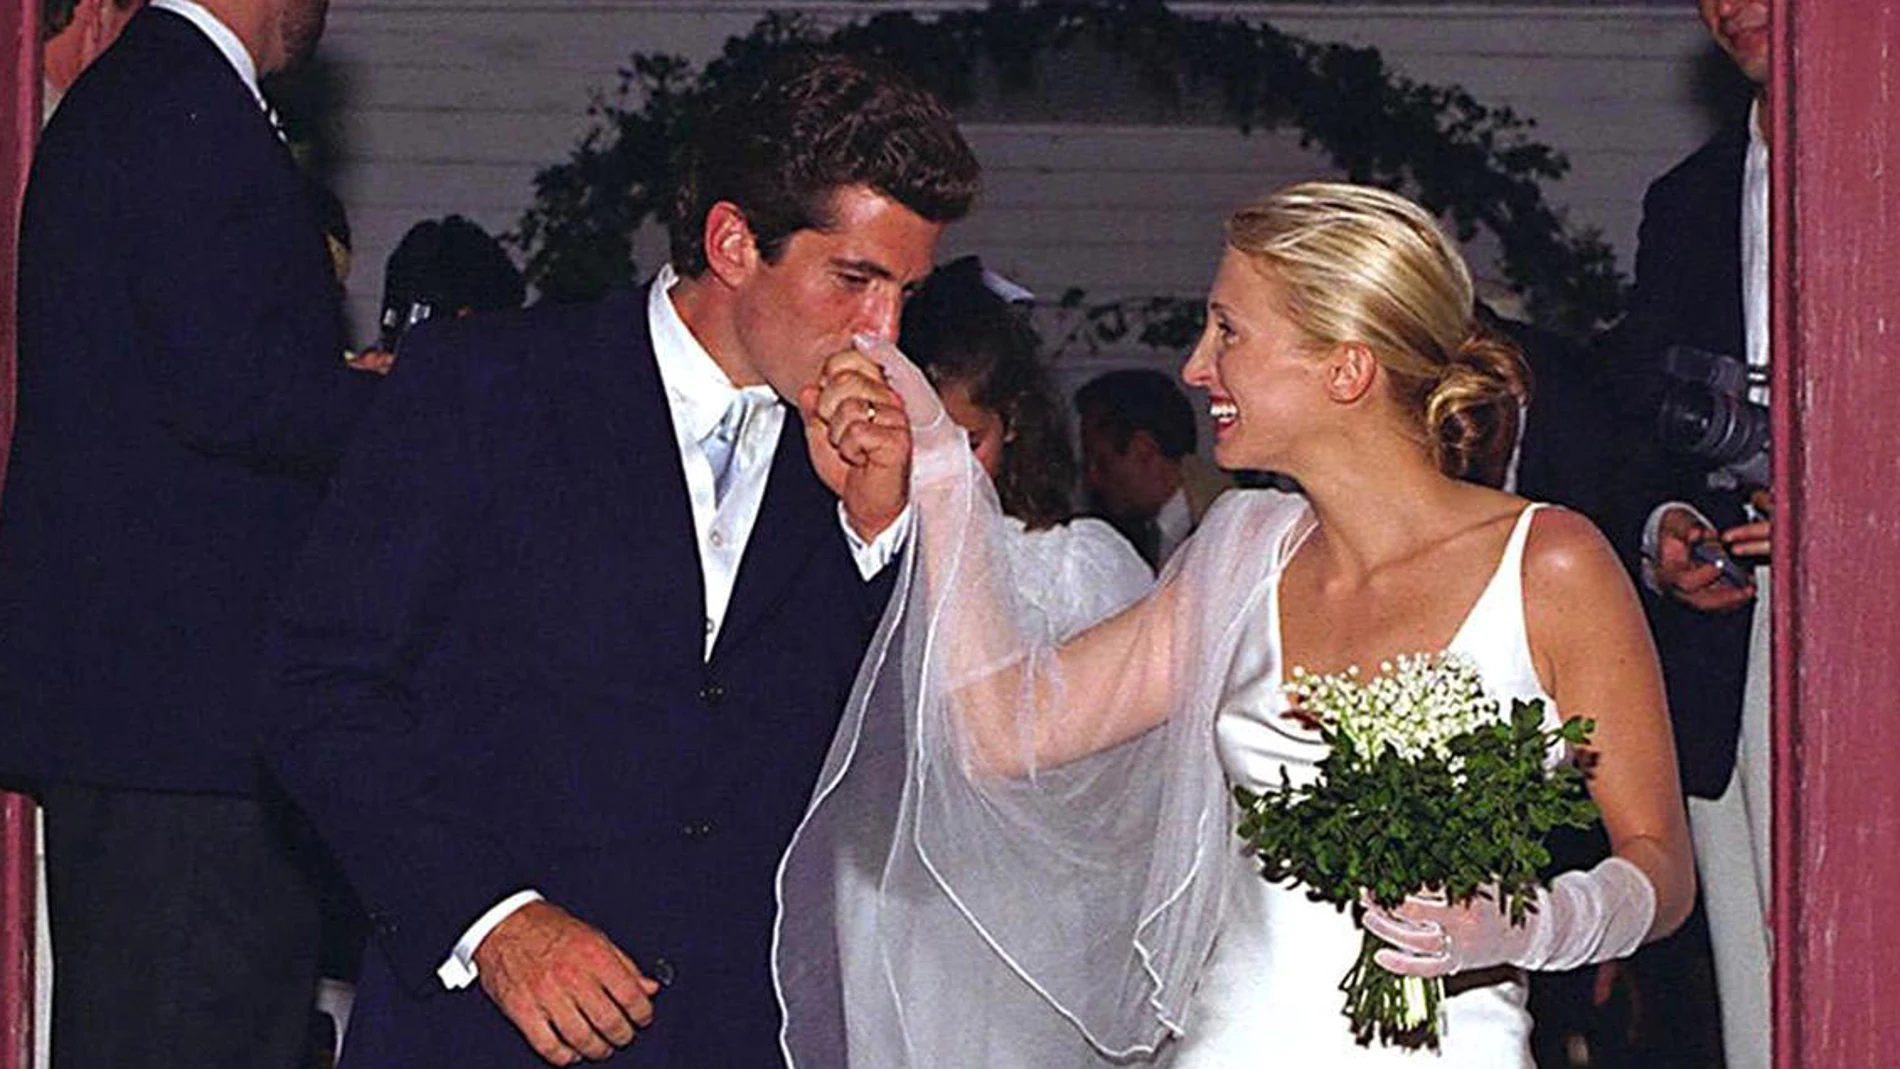 John F. Kennedy Jr., the son of President John F. Kennedy, and Carolyn Bessette leave a church after being wed in a small private ceremony on Cumberland Island Sept. 21, 1996, off the coast of Georgia.